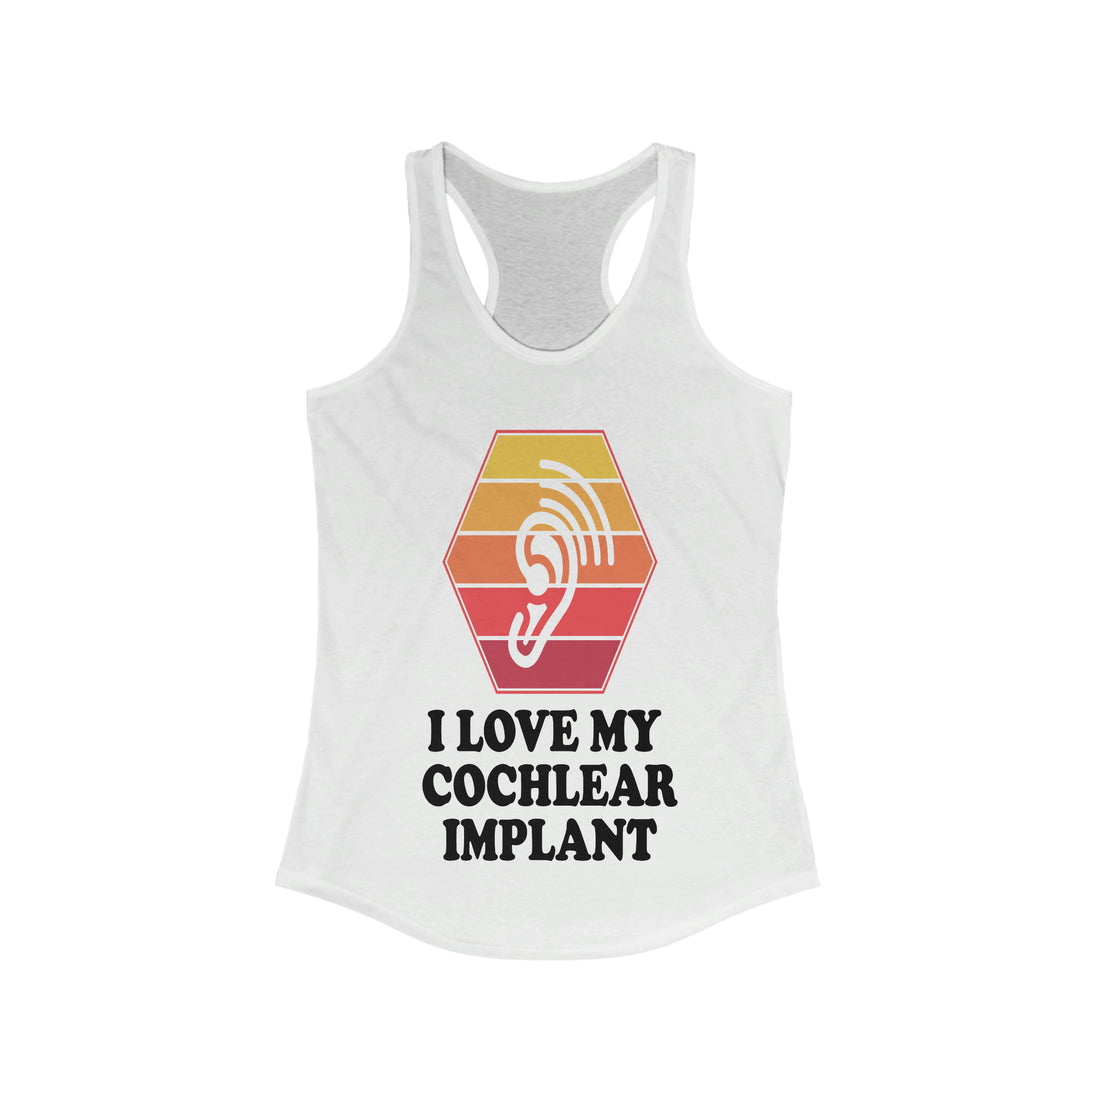 I Love My Cochlear Implant - Racerback Tank Top